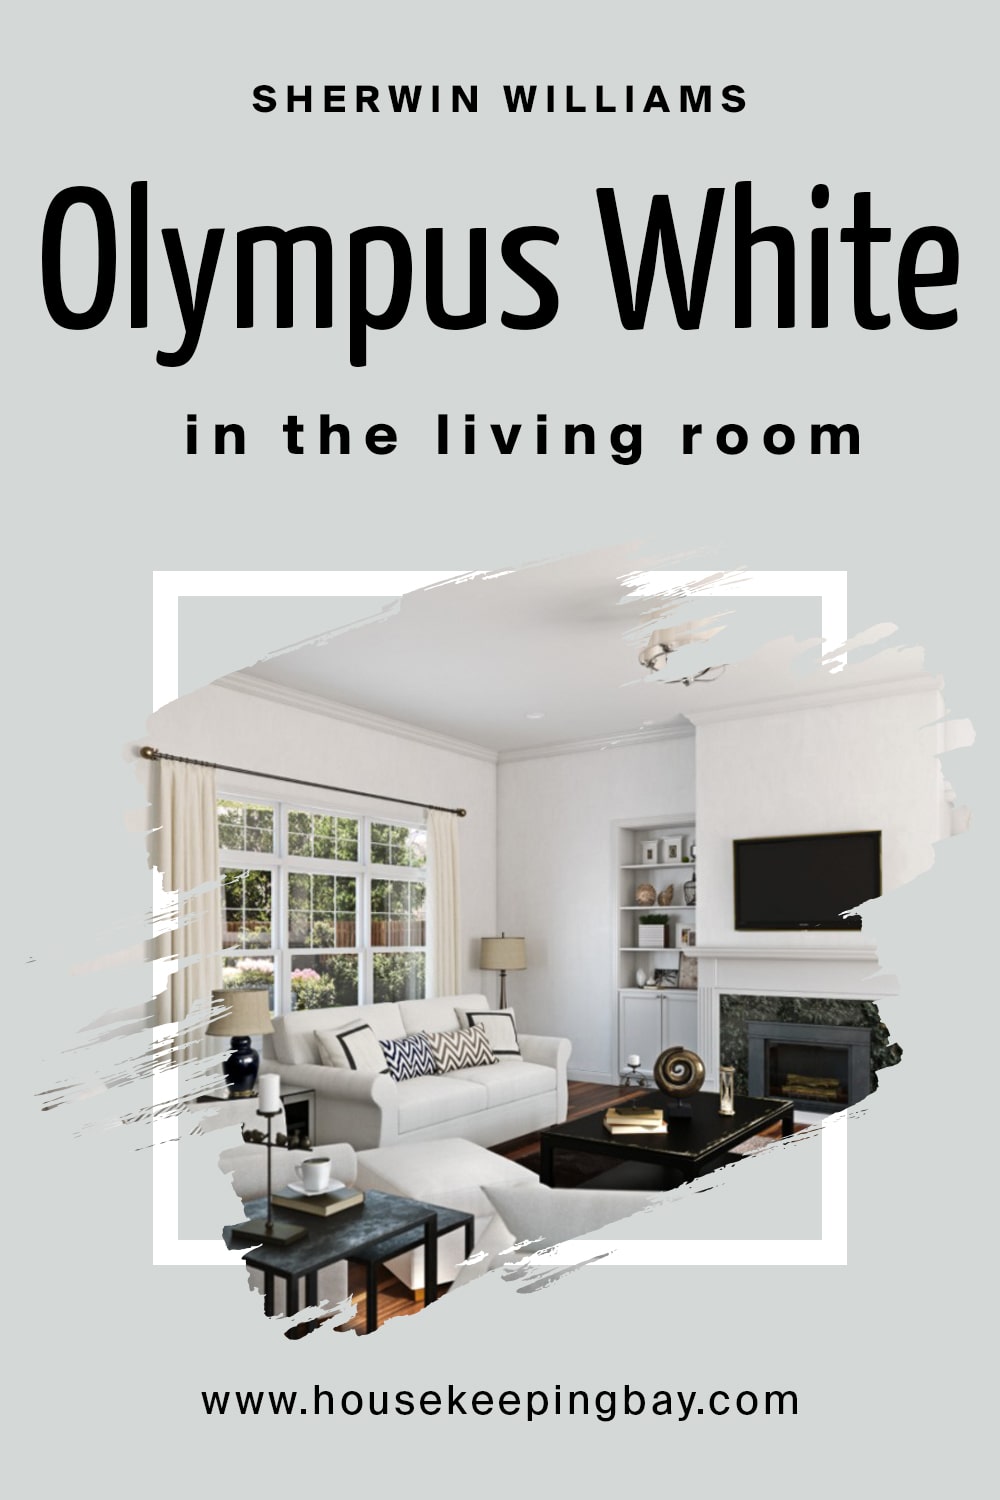 Sherwin Williams. Olympus White In the living Room